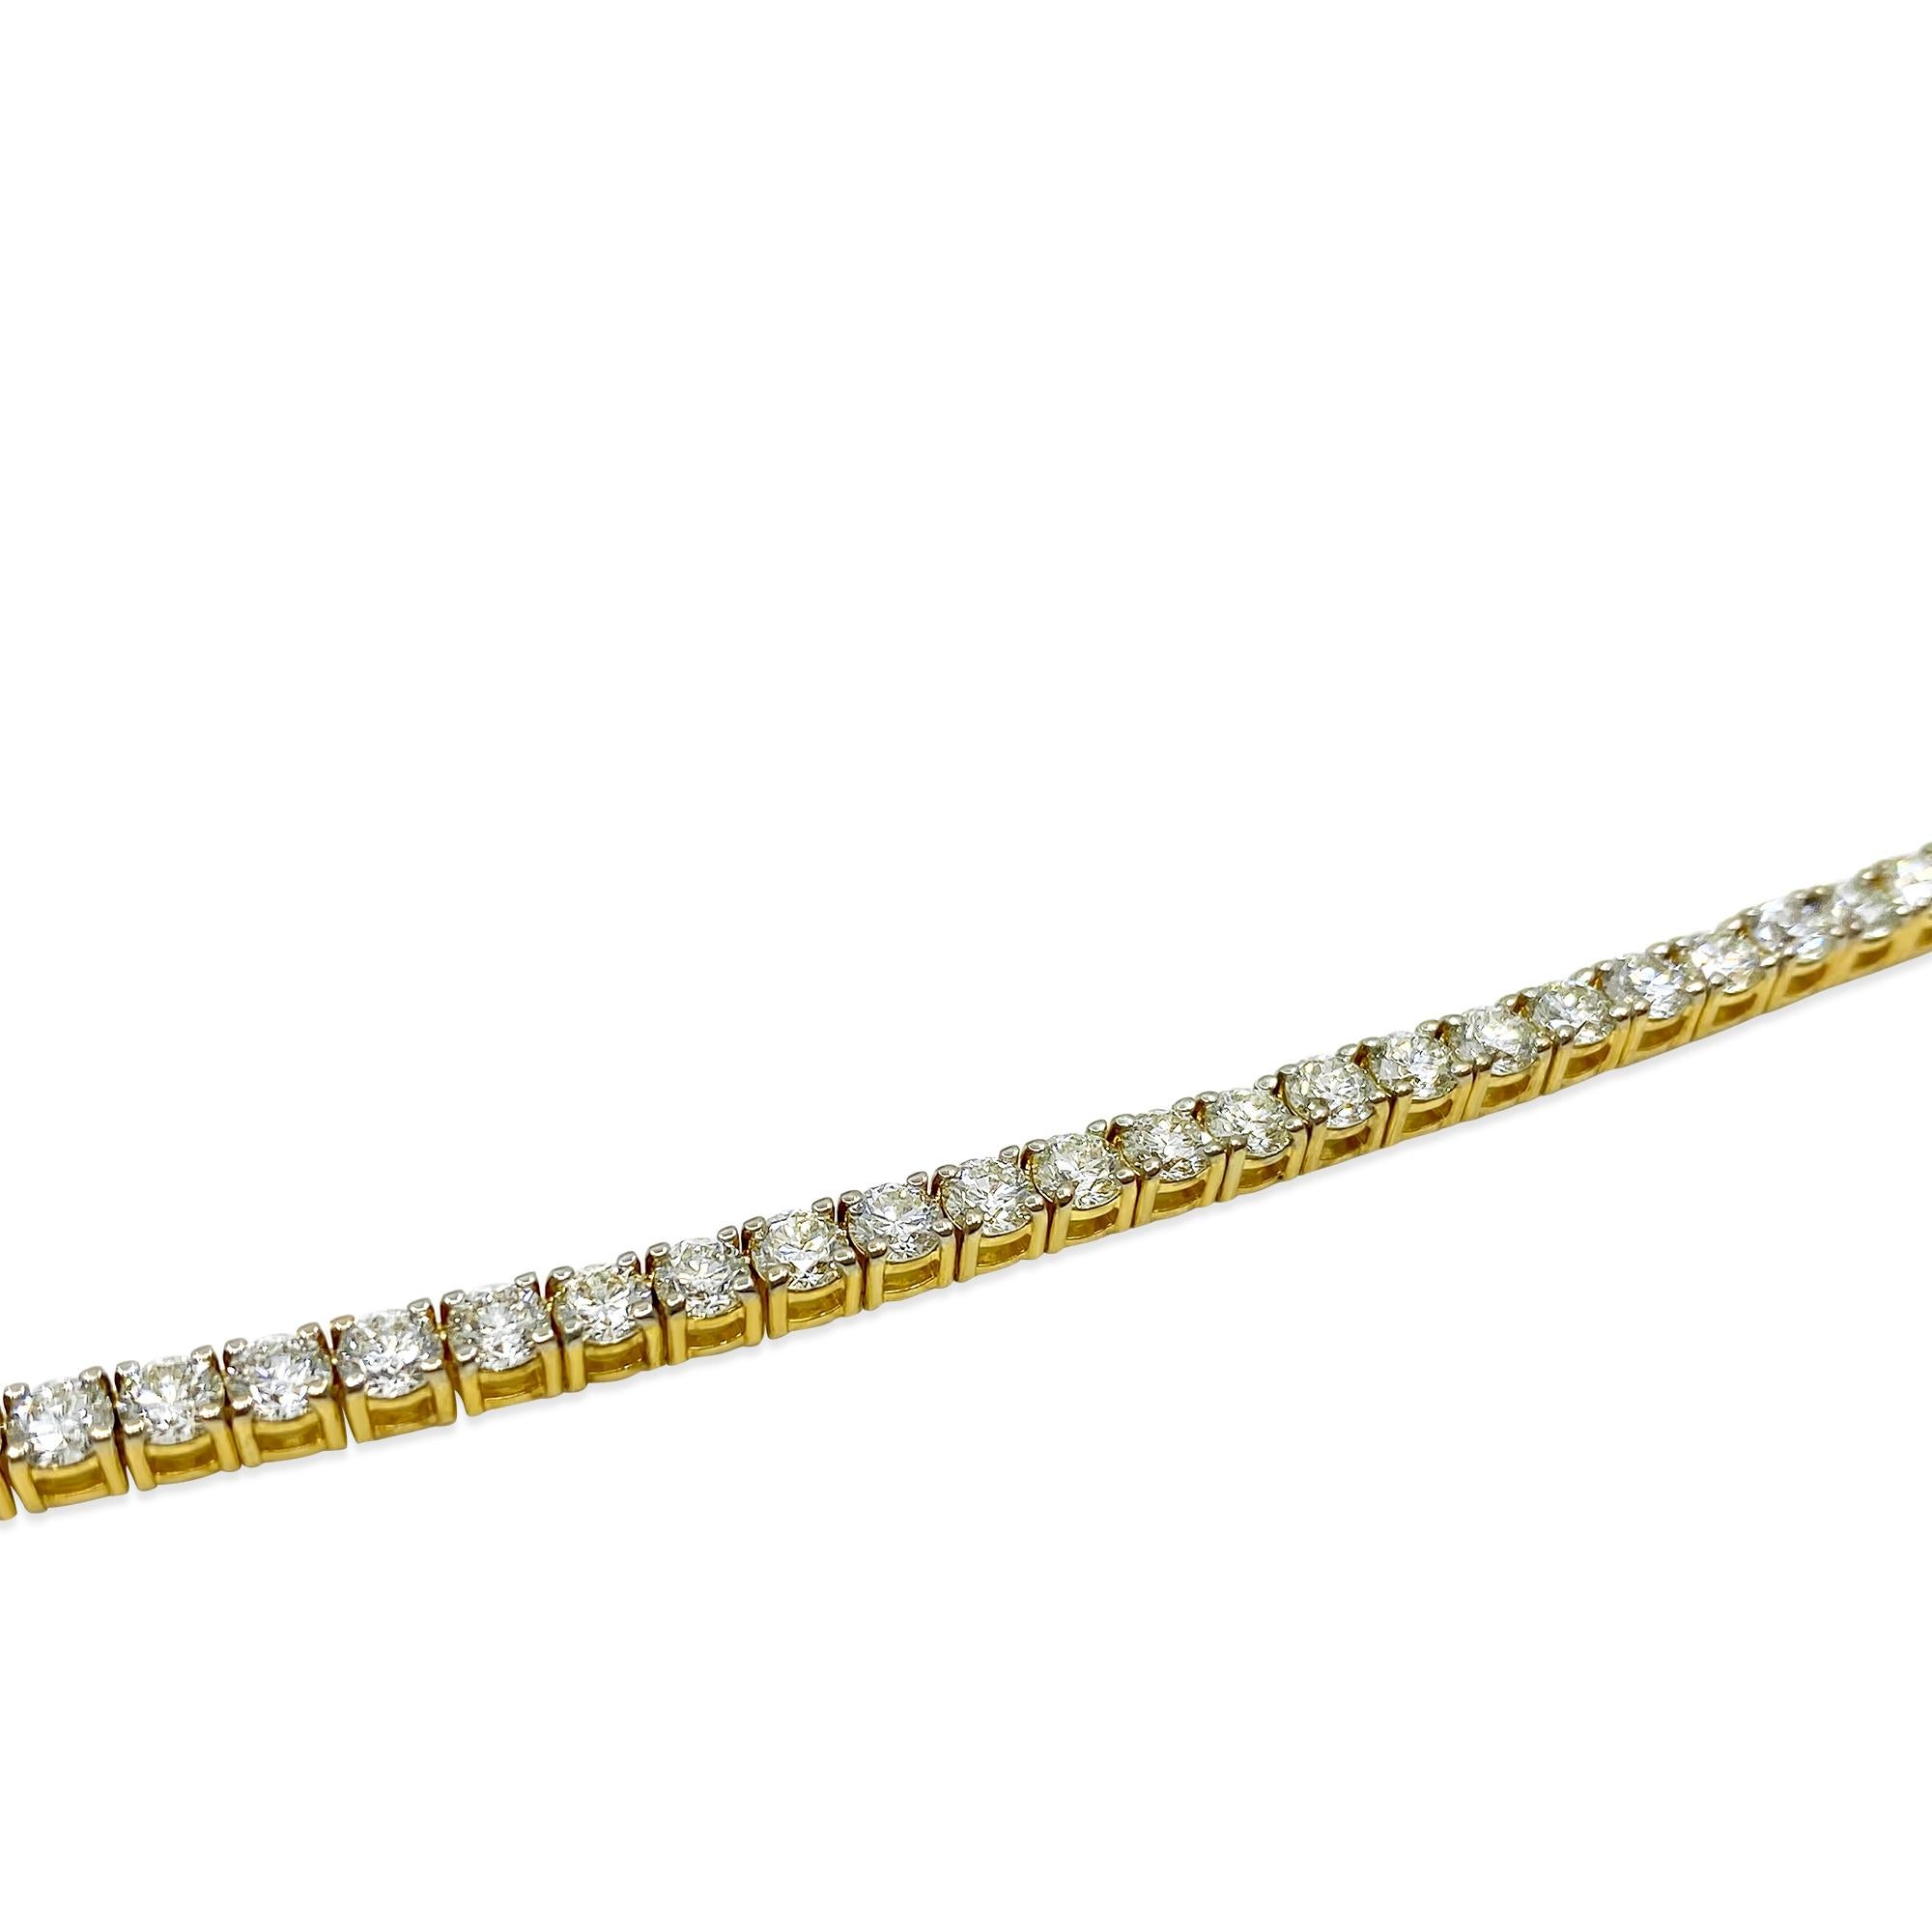 Crafted from 14-karat yellow gold, this exquisite necklace features a remarkable 23 carats of diamonds, boasting very high to slightly included clarity (VVS-VS) and an H color grade. The necklace, measuring 24 inches in length, showcases round